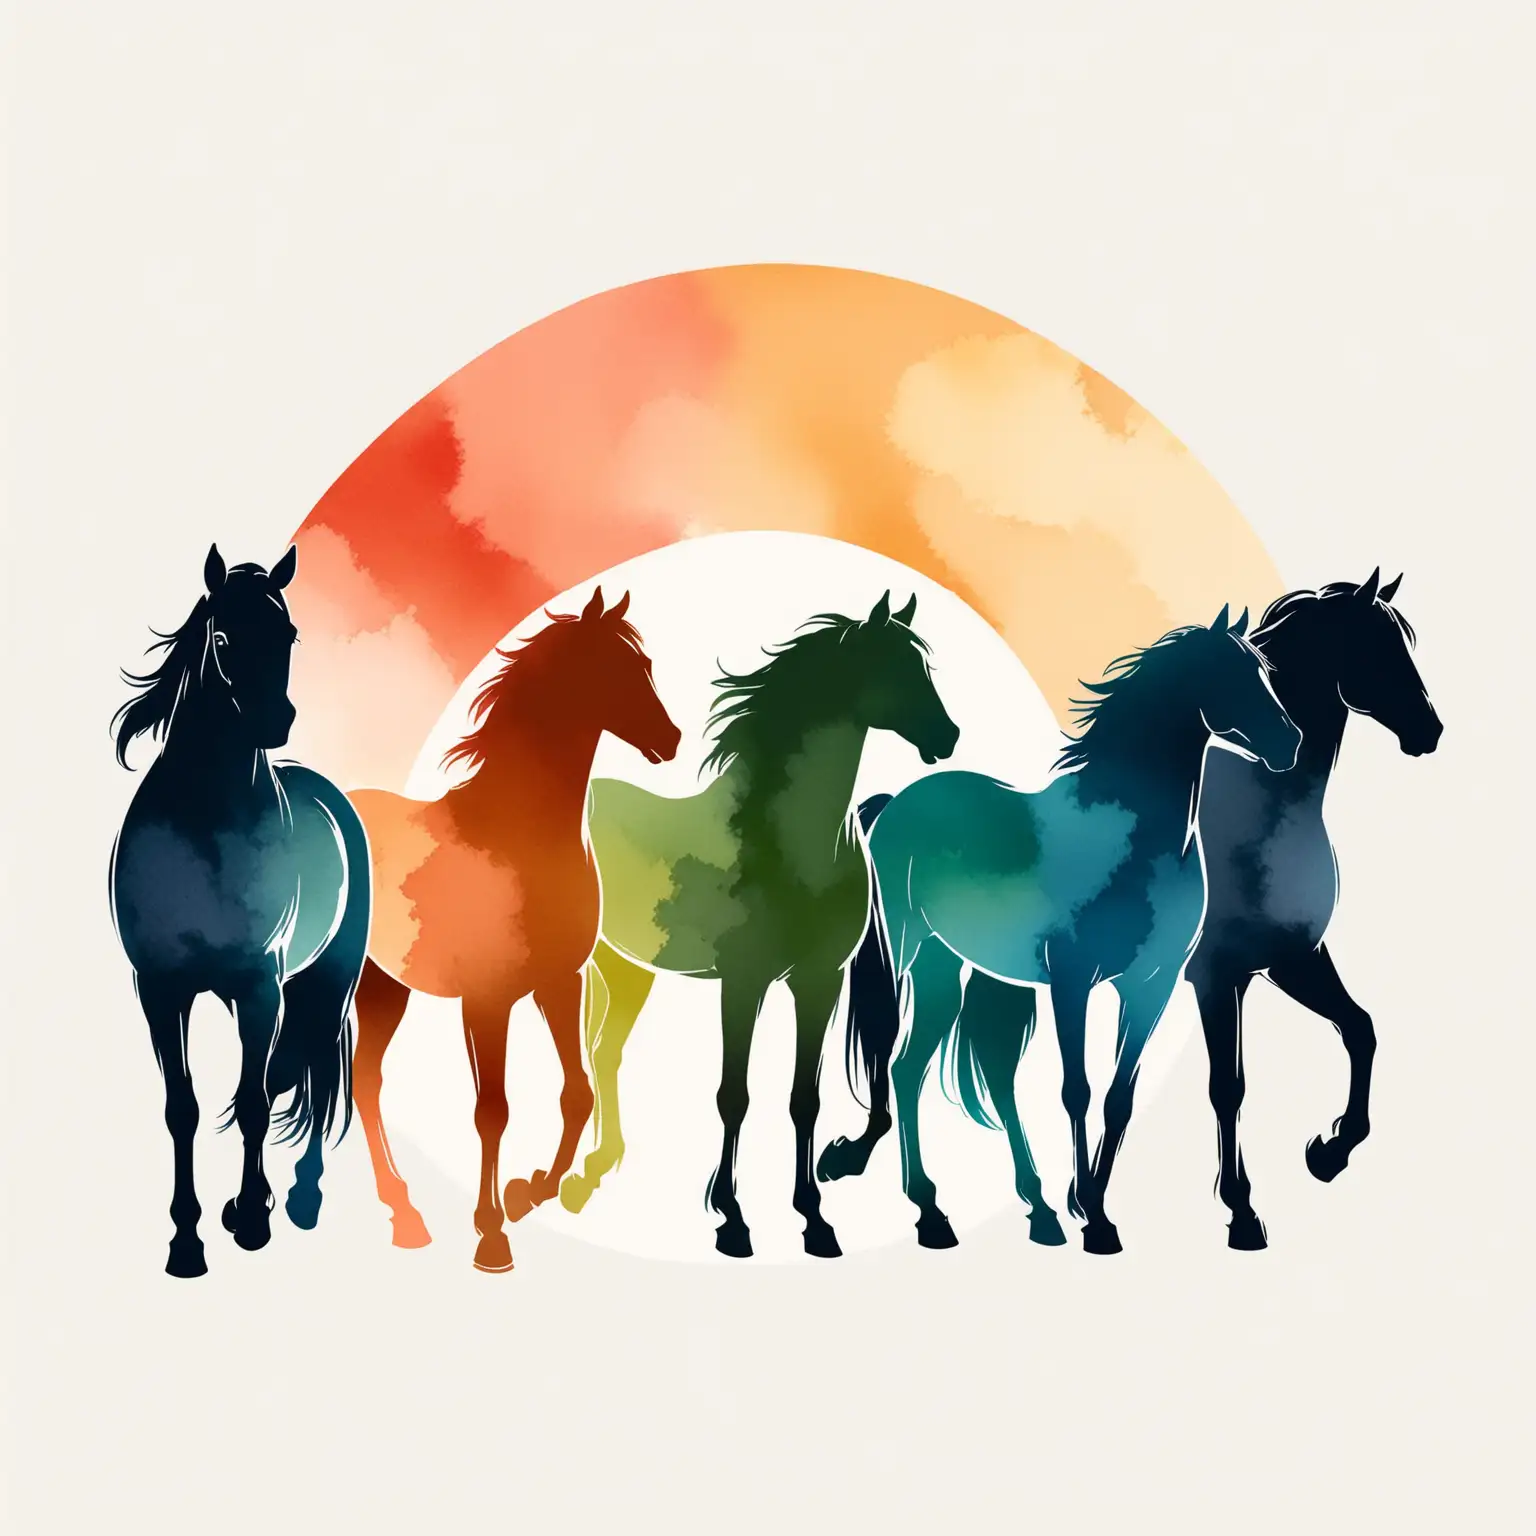 Four horses , Abstract silhouettes, clean lines, simple shapes, watercolor palette , minimal details. It's a vector illustration. It has a vintage look, artistic 